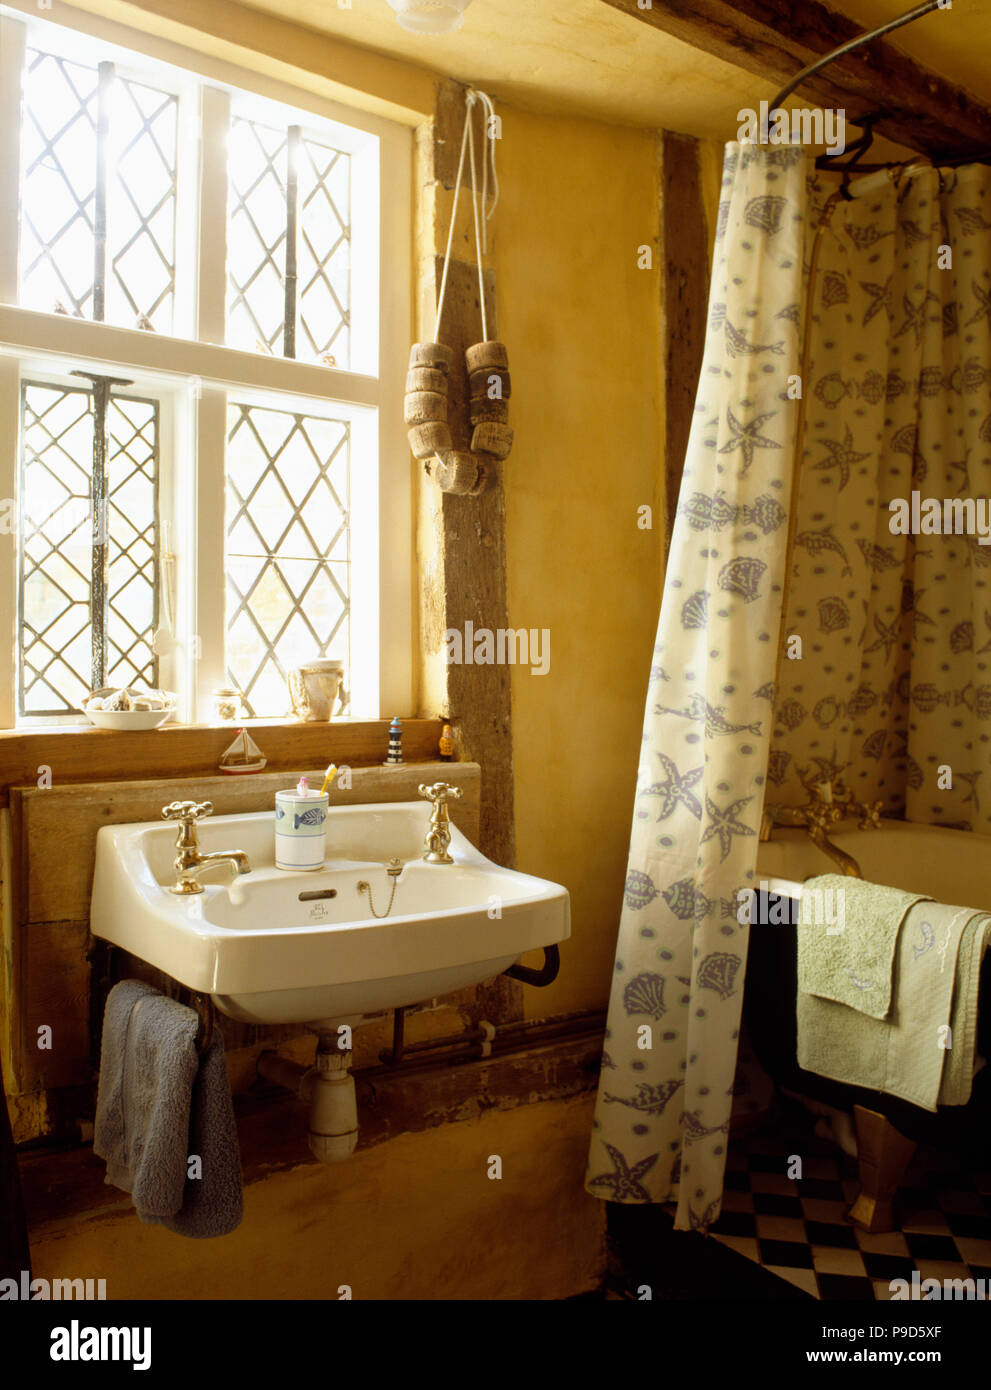 String of cork floats on window above basin in country bathroom with seashore-patterned shower curtain on bath Stock Photo